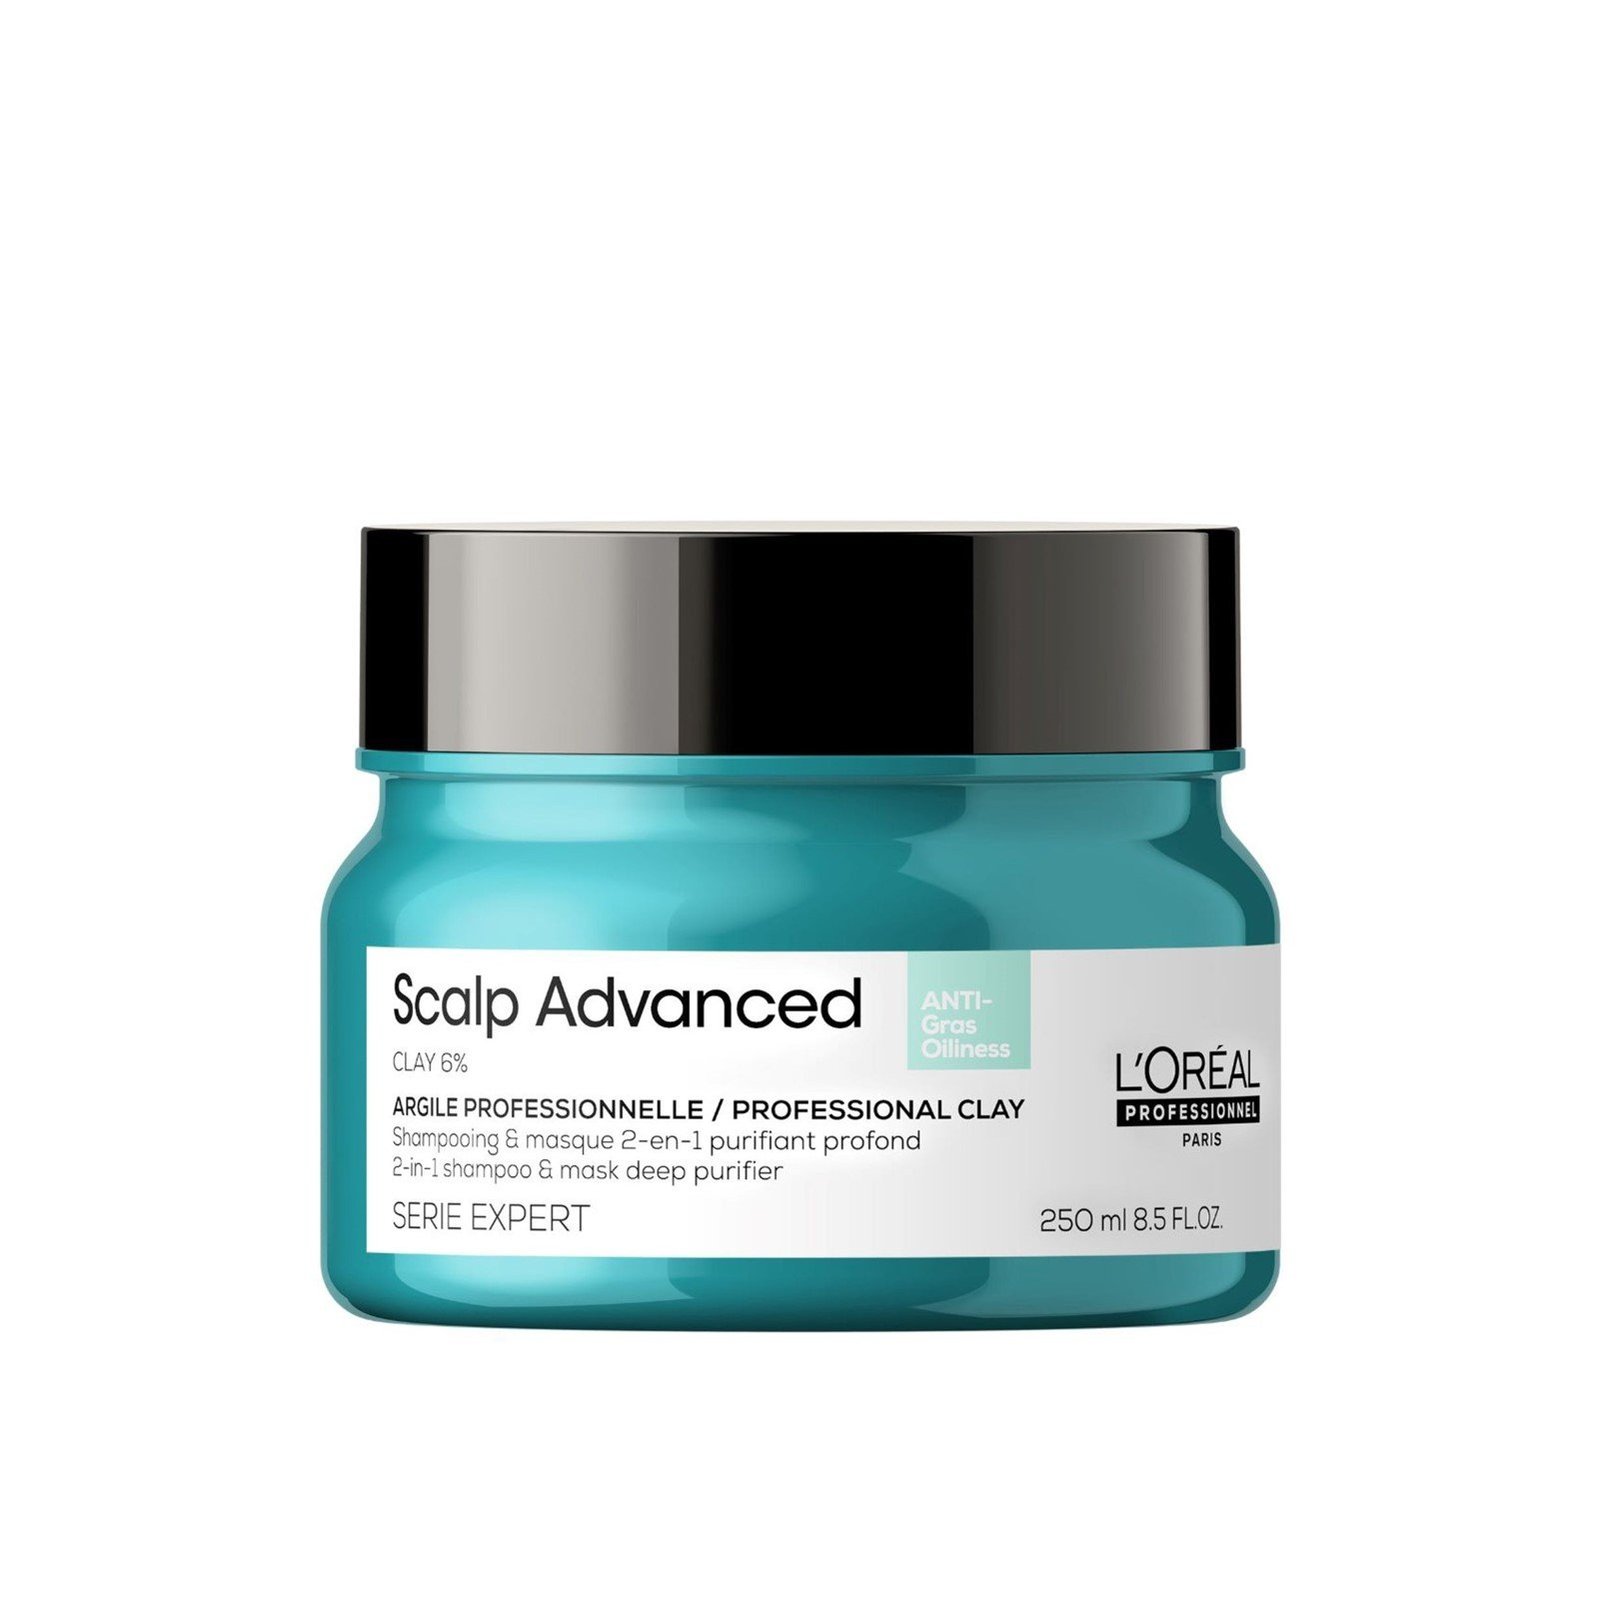 L'Oréal Professionnel Serie Expert Scalp Advanced Anti-Oiliness 2-in-1 Clay 250ml